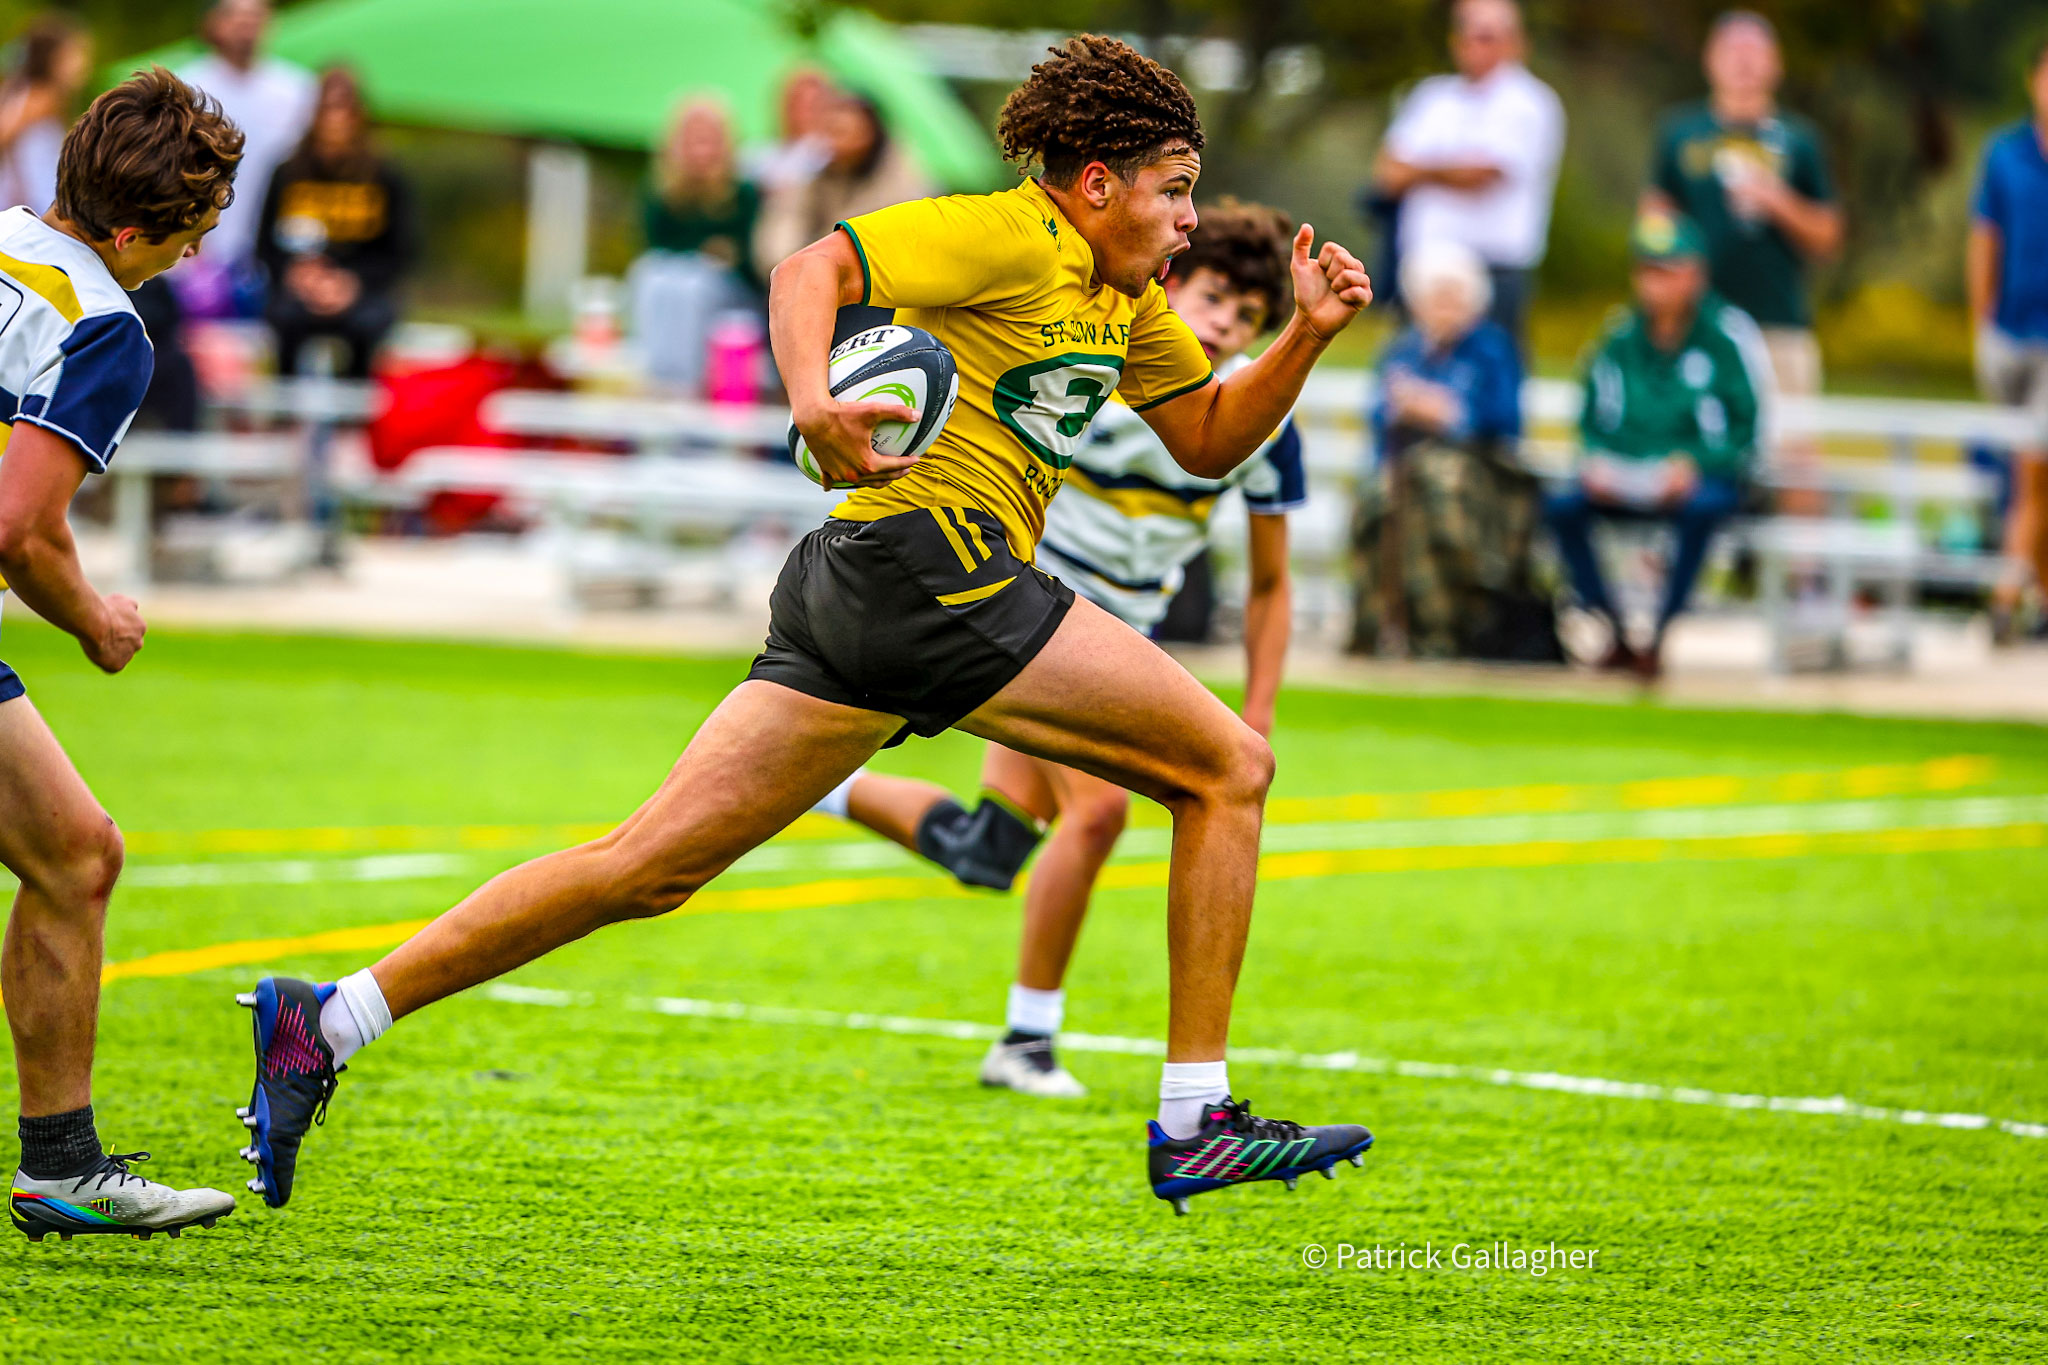 varsity gold rugby player scoring during a match in 2023